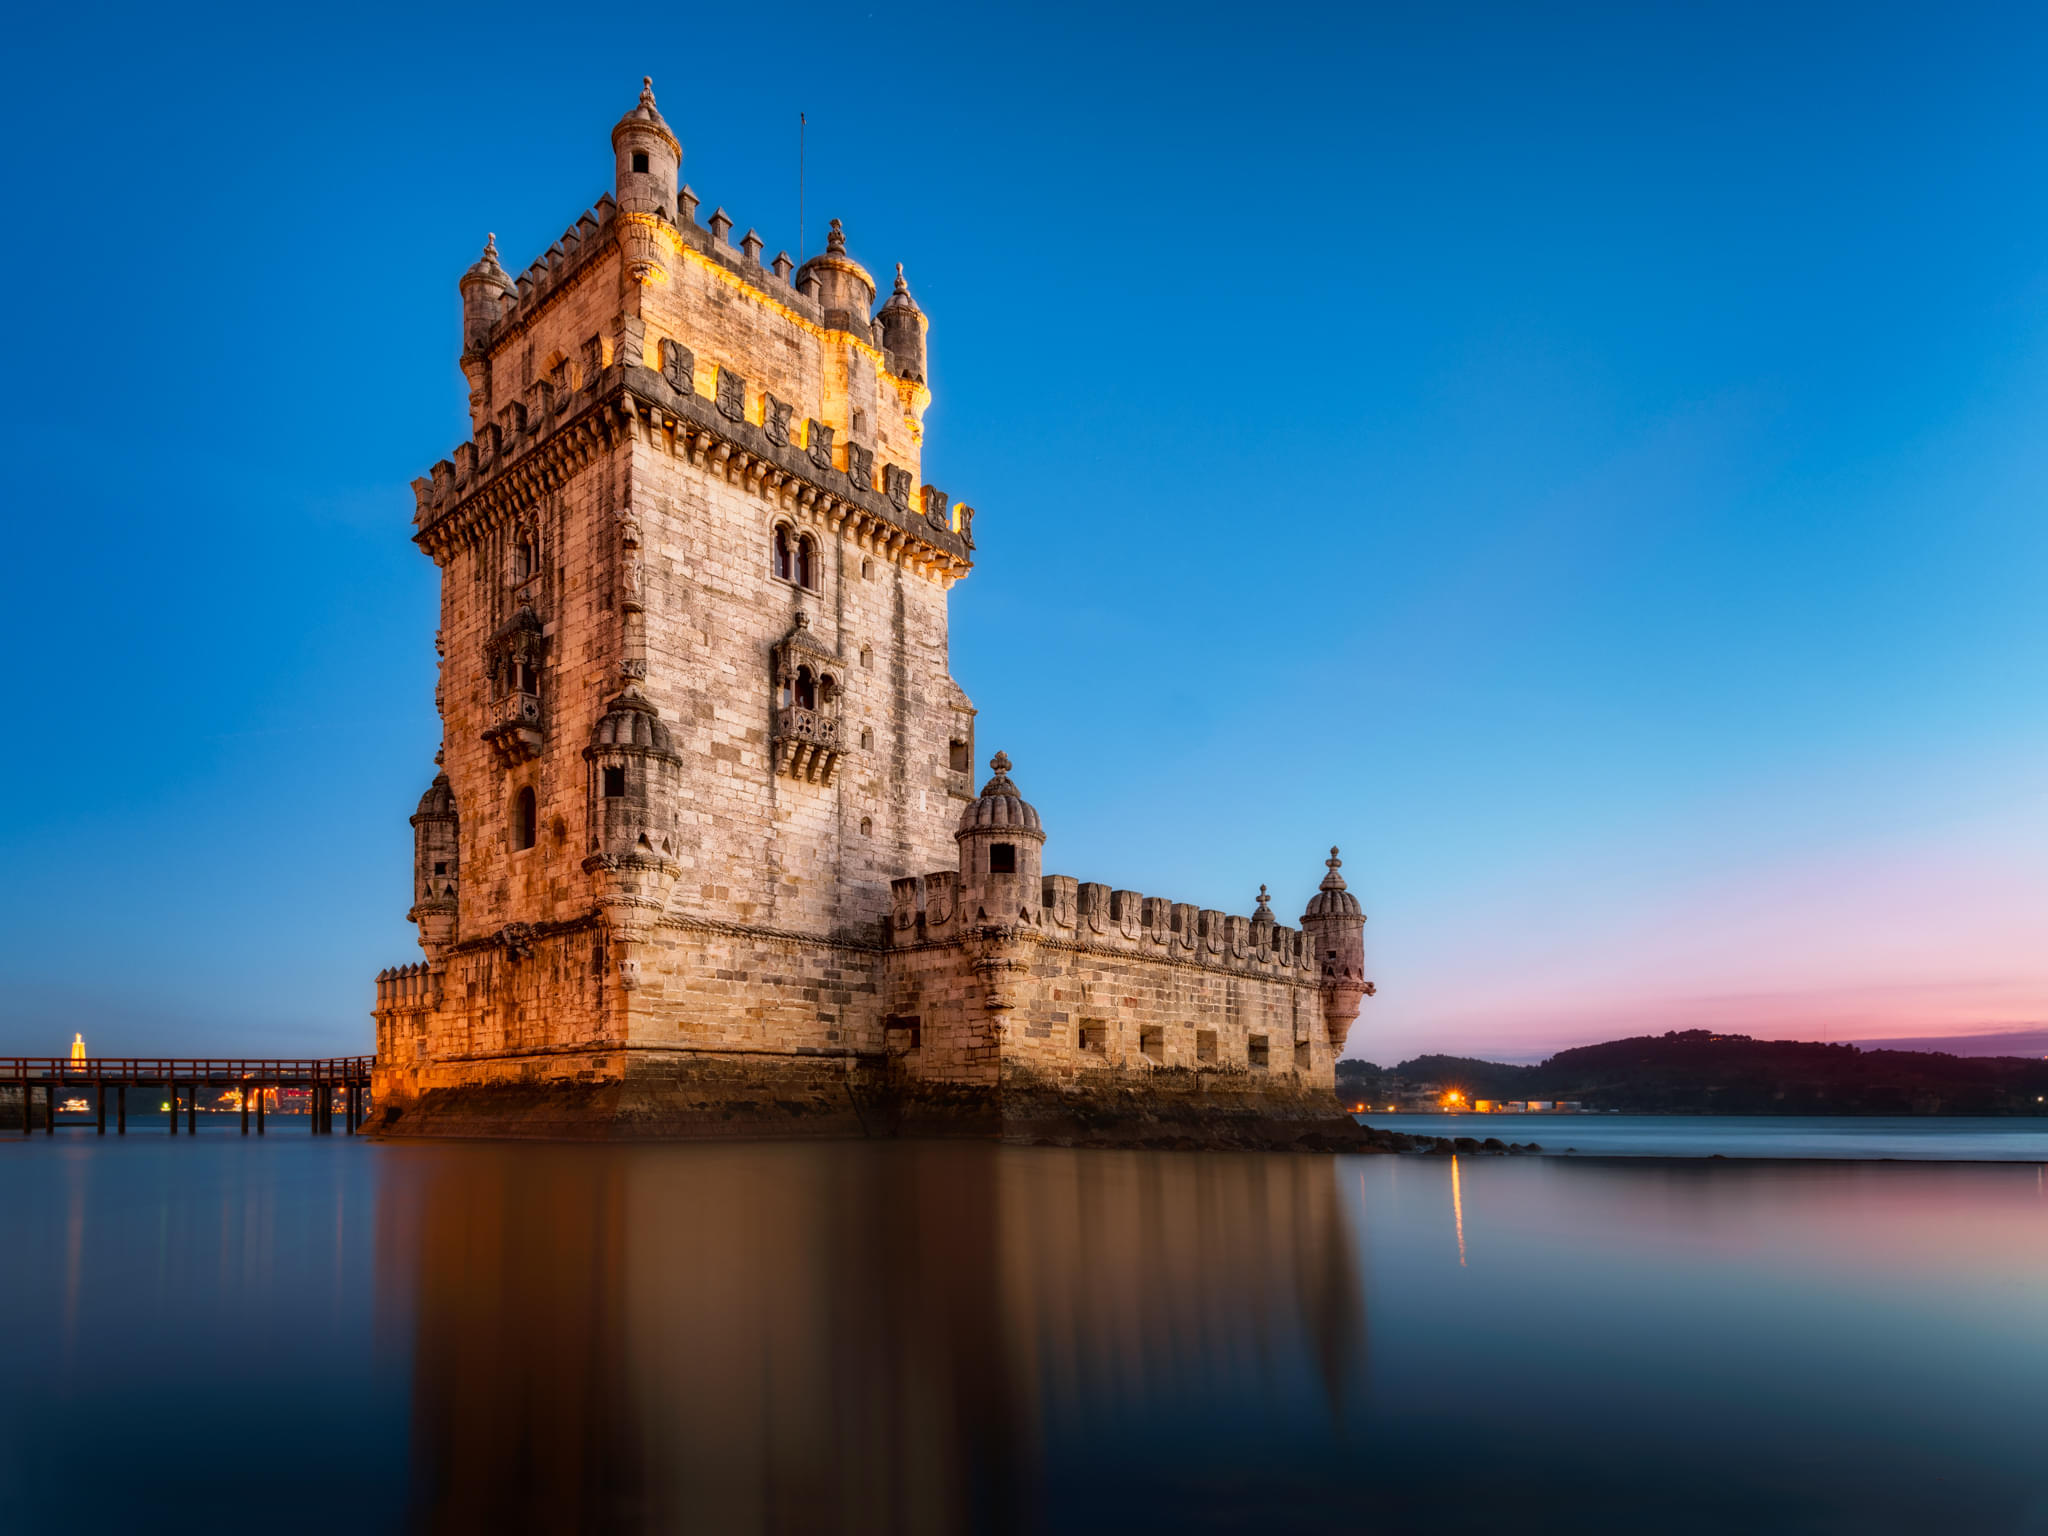 Belem Tower Overview